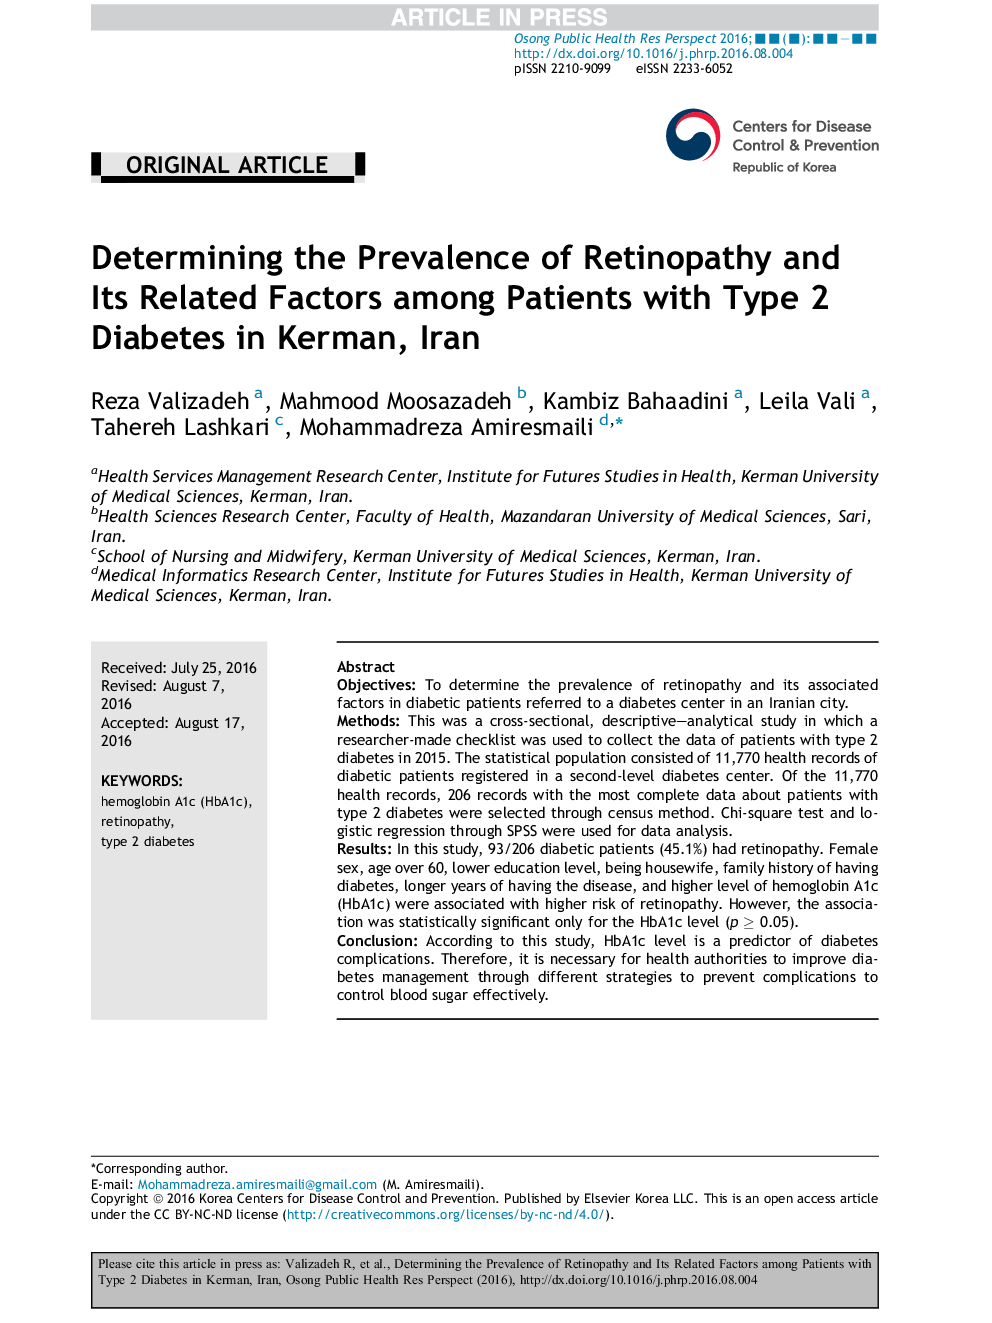 Determining the Prevalence of Retinopathy and Its Related Factors among Patients with Type 2 Diabetes in Kerman, Iran